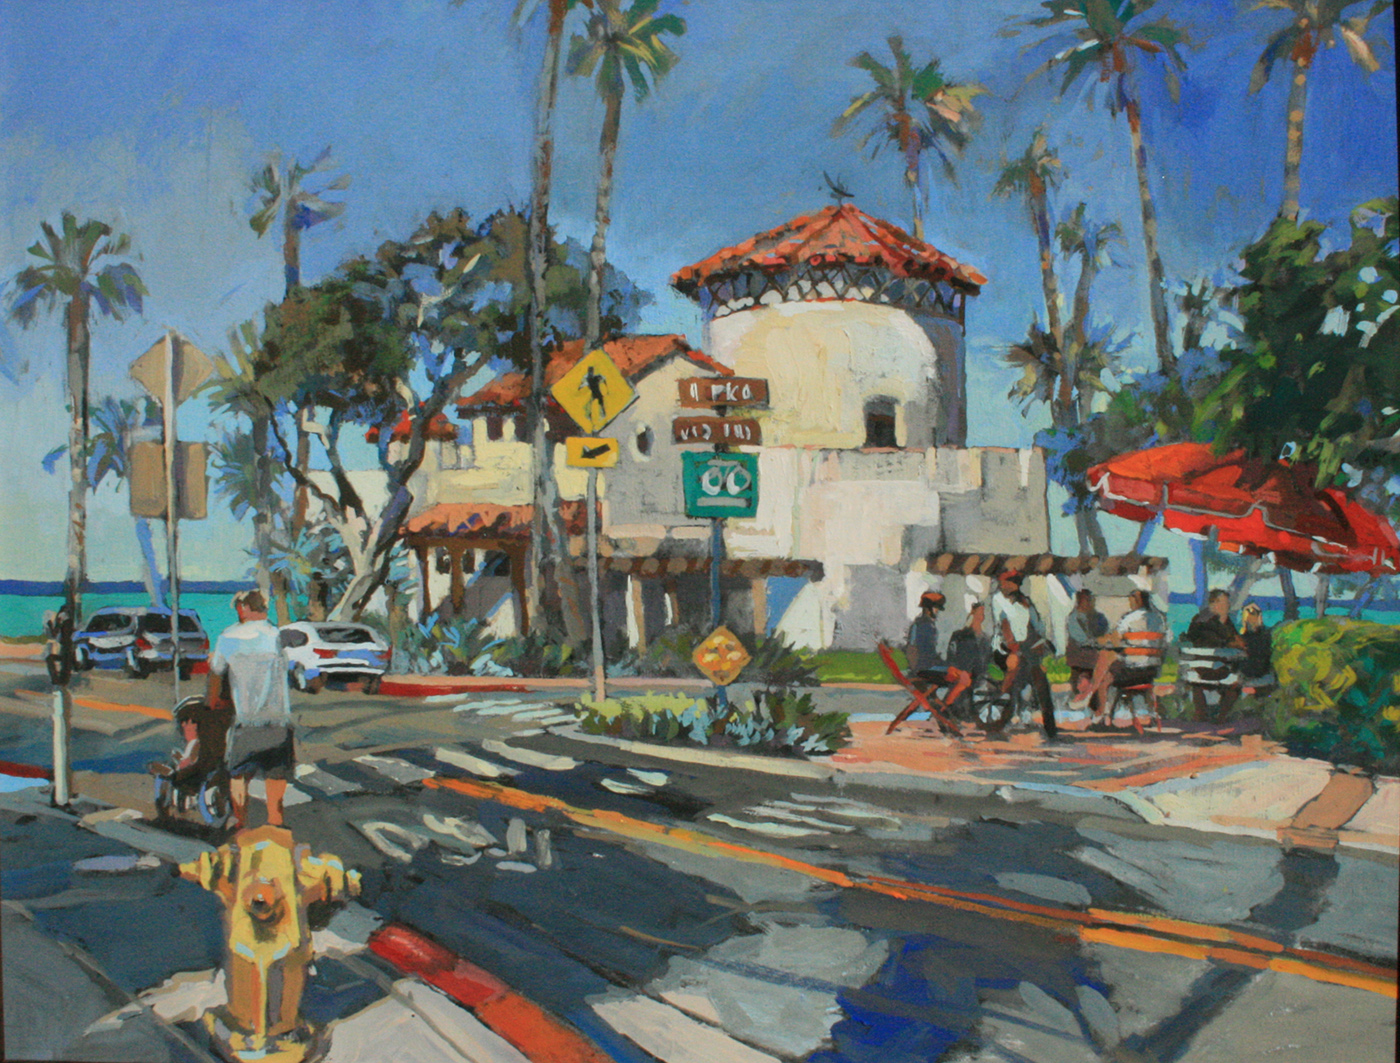 caesin painting of a tall building surrounded by palm trees with a road 